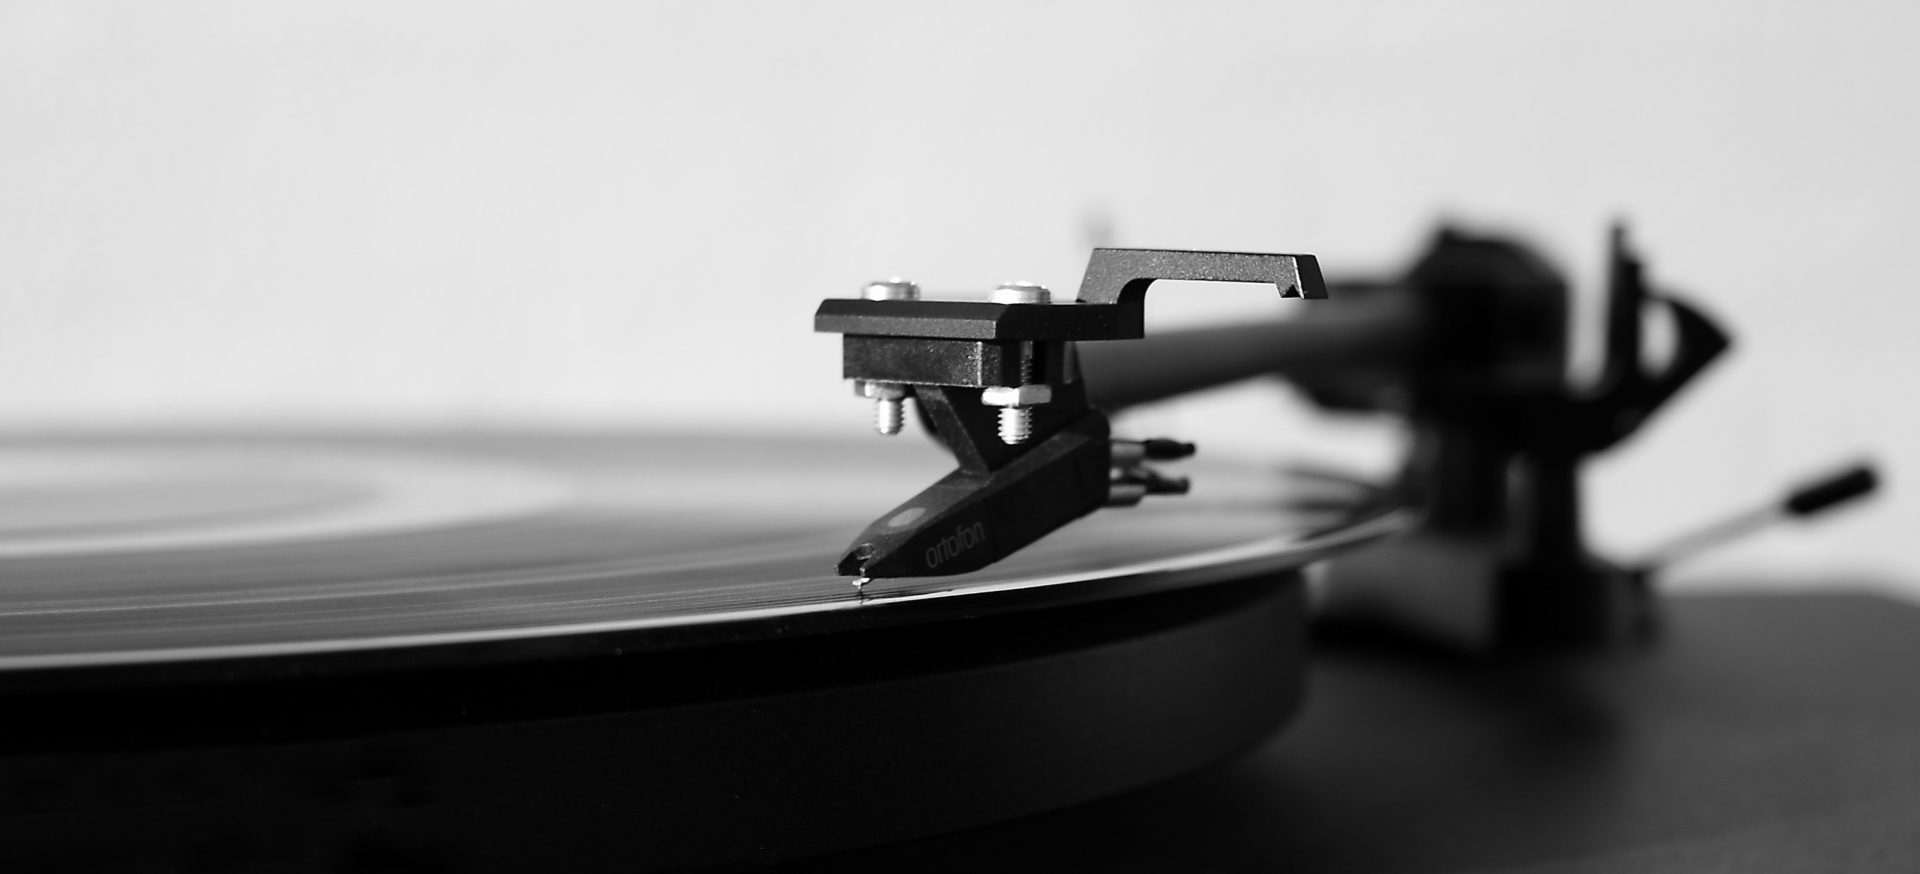 How Often Should You Replace Your Record Player Needle?